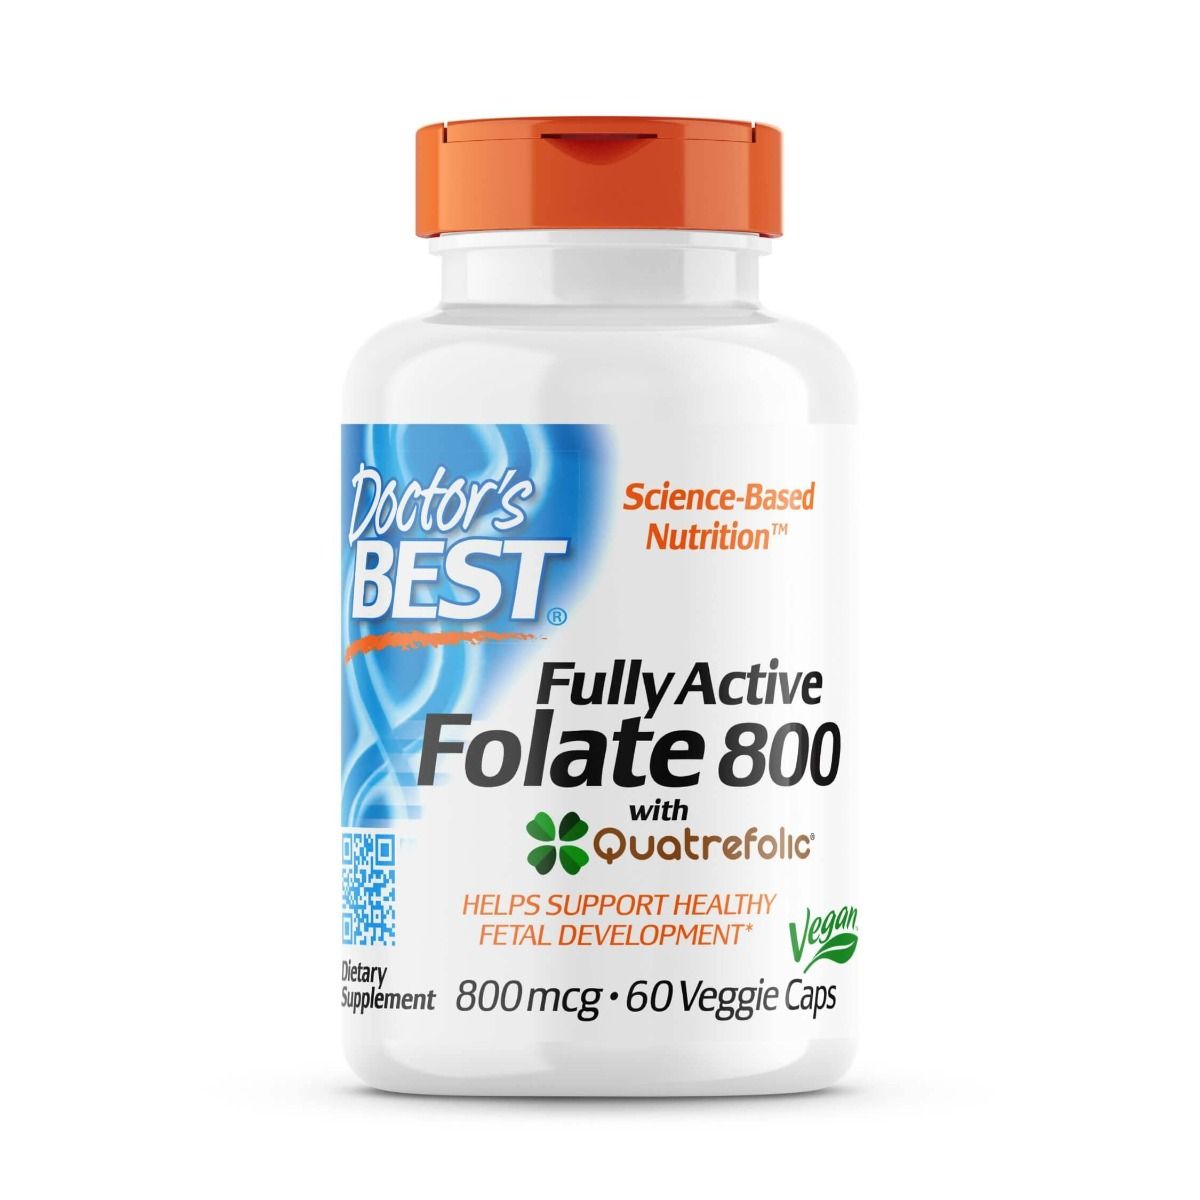 Photos - Vitamins & Minerals Doctors Best Doctor's Best Fully Active Folate 800, 800 mcg 60 Veggie Capsules PBW-P307 